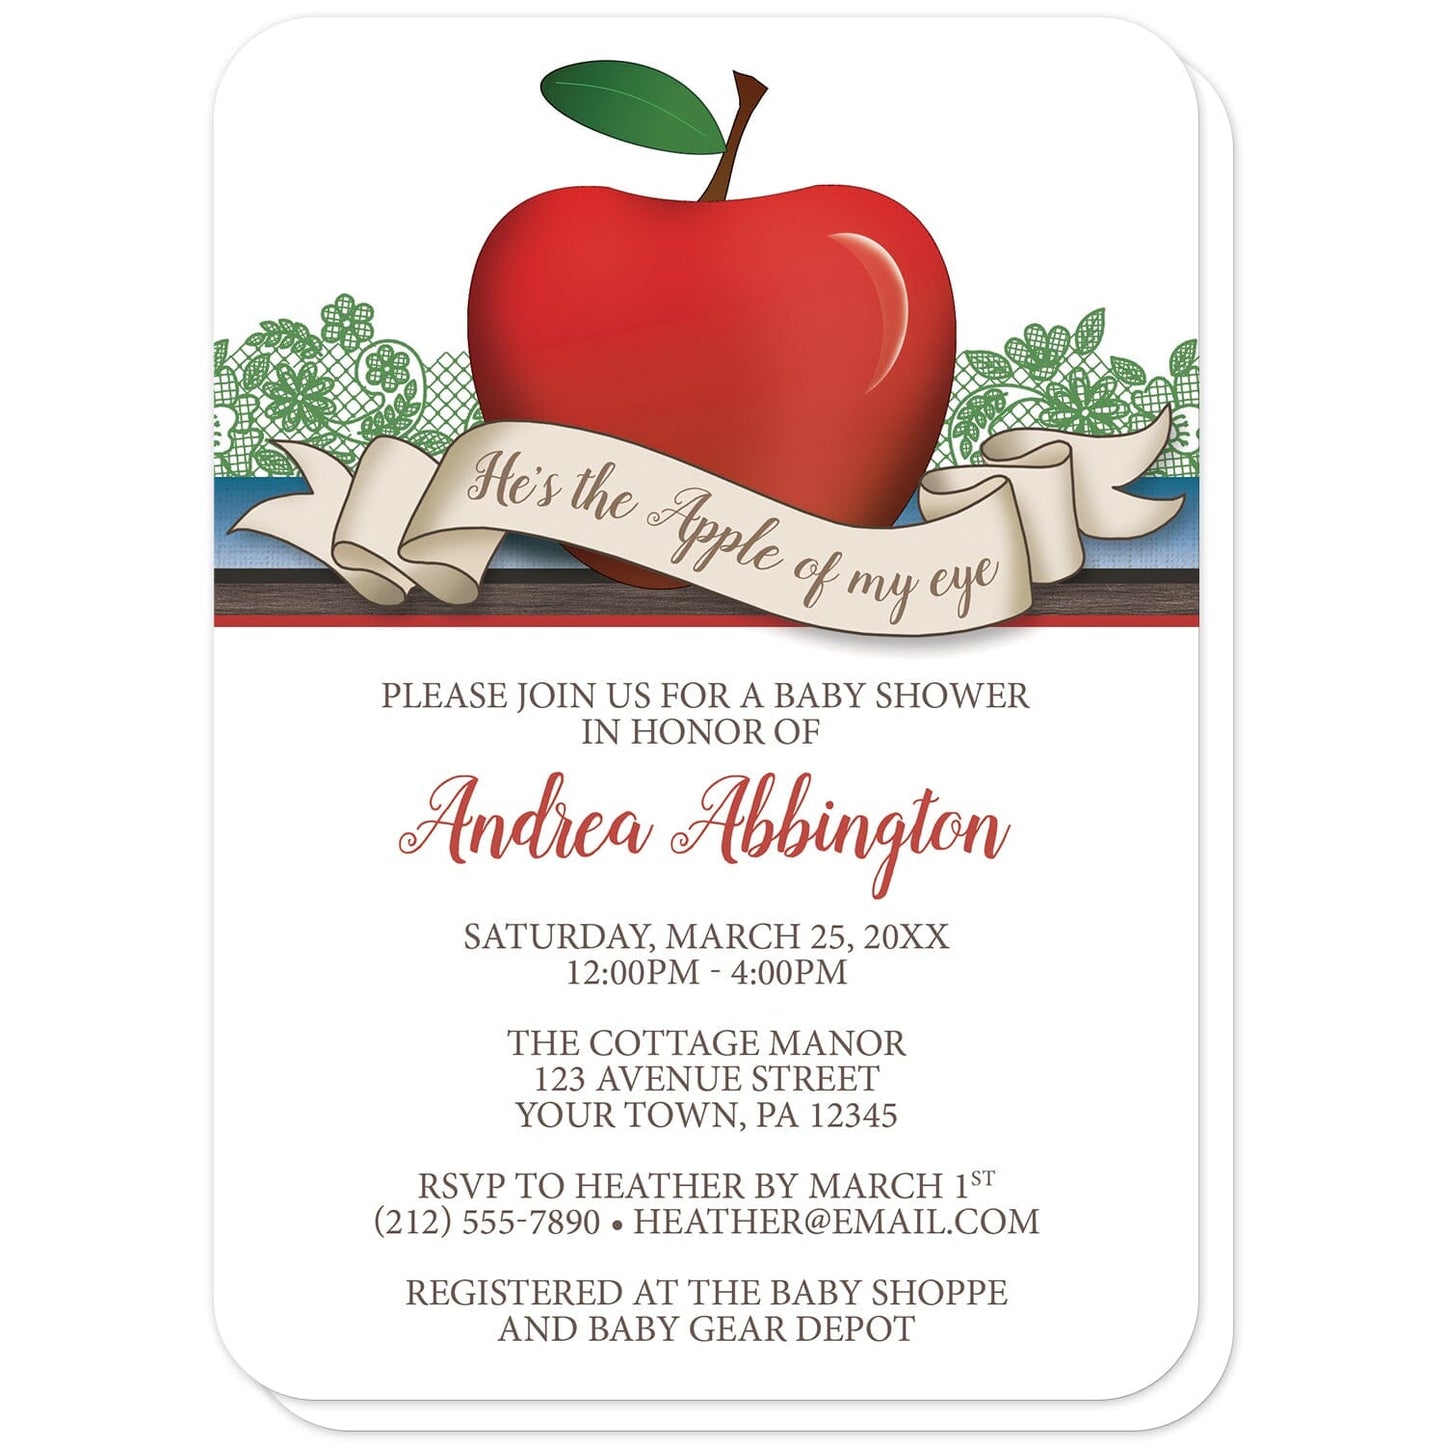 Boy Red Apple of My Eye Baby Shower Invitations (with rounded corners) at Artistically Invited. Boy red apple of my eye baby shower invitations for a baby boy with a red apple over green lace, and a ribbon banner that reads: 'He's the Apple of my eye'. This cute red apple drawing stands on horizontal blue and brown wood stripes. The personalized information you provide for your baby shower will be printed in red and brown over a white background. 